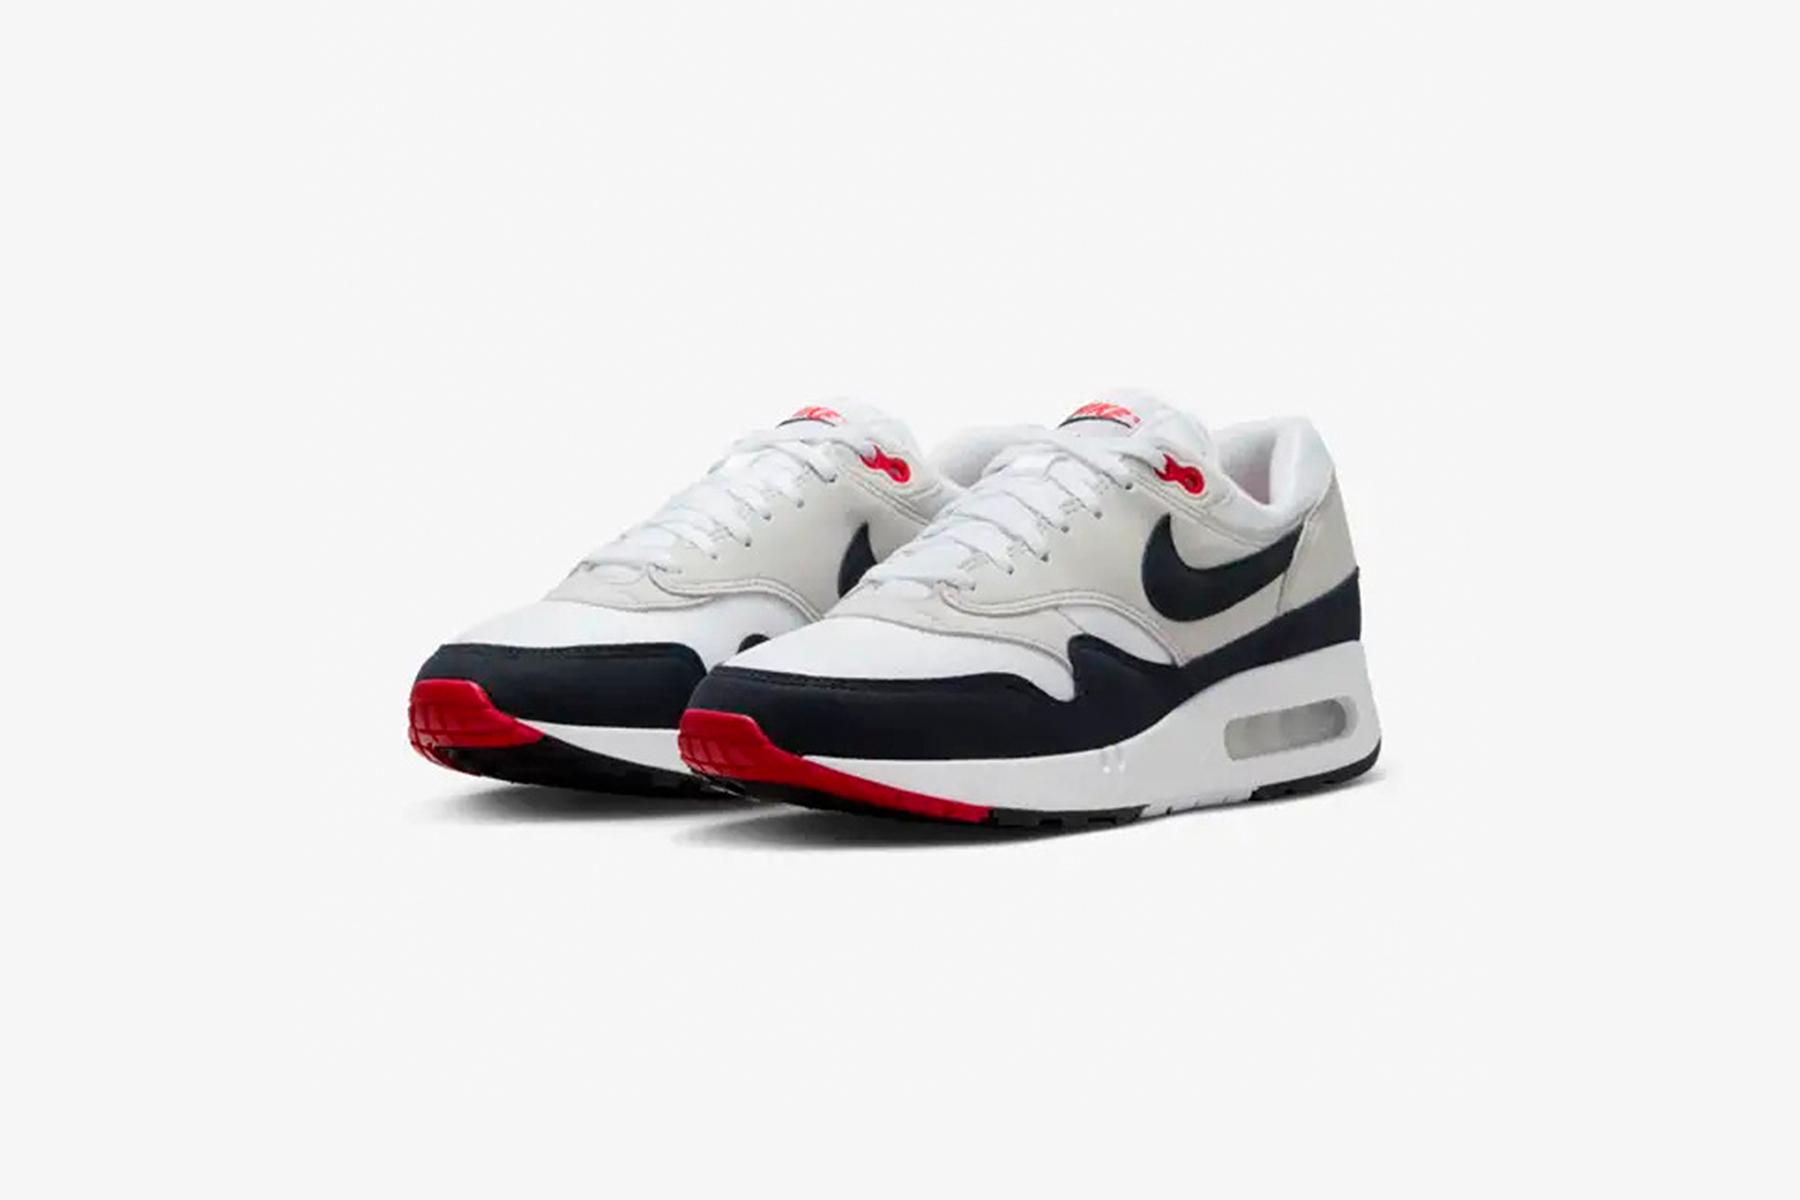 Nike Air Max 1 Obsidian Retro Round-Up | From &#8217;86 to &#8217;23.